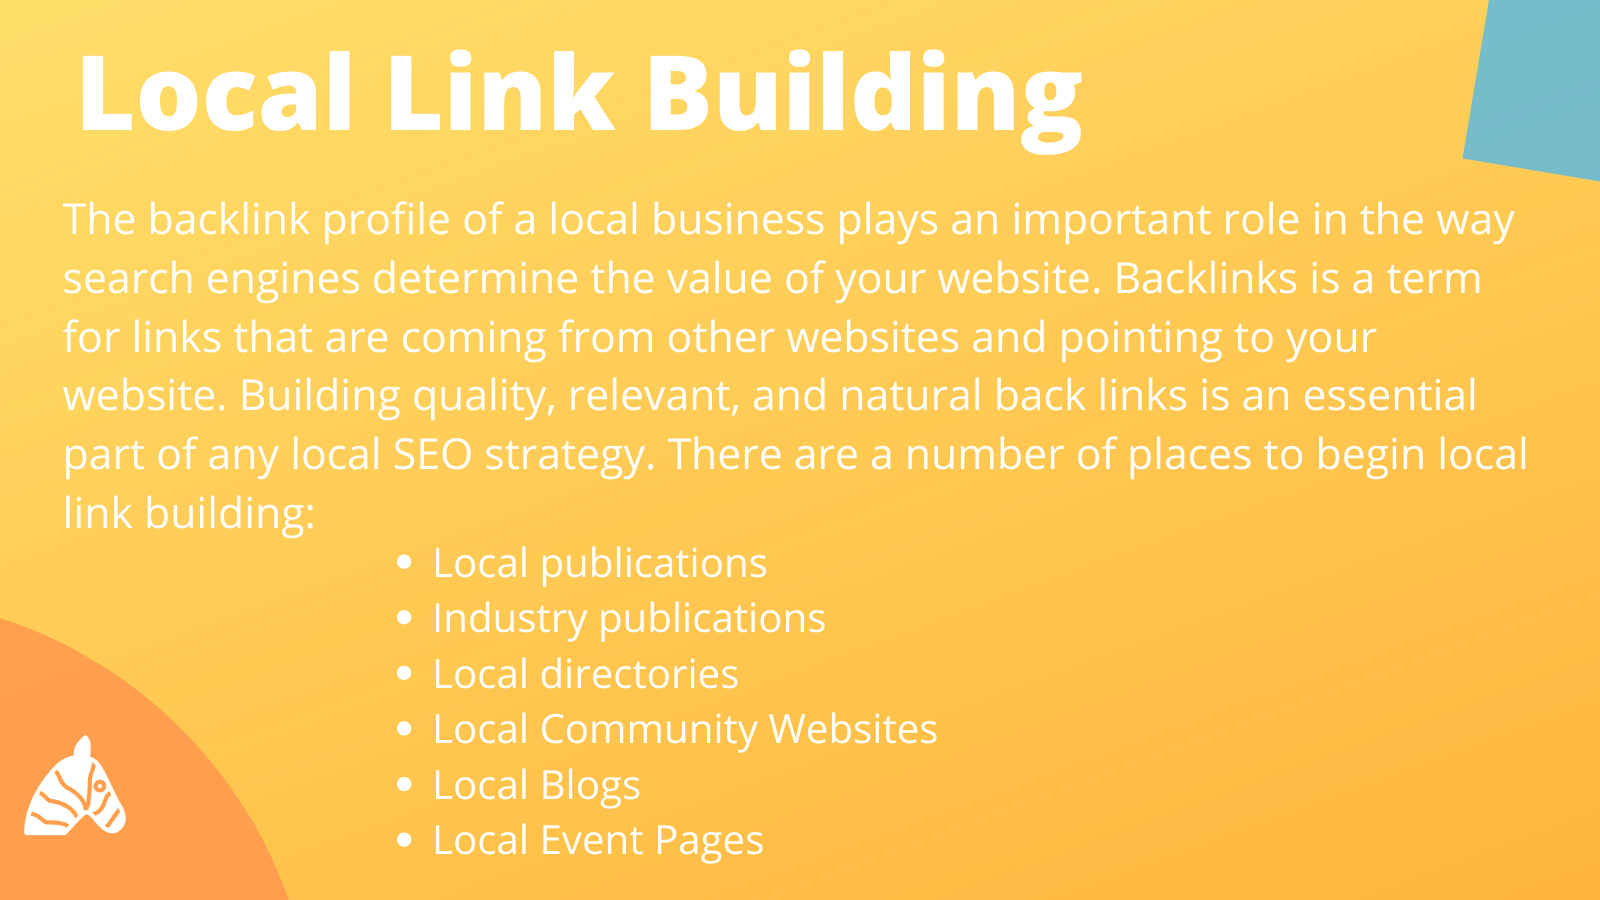 Why local link building is important in a local SEO campaign